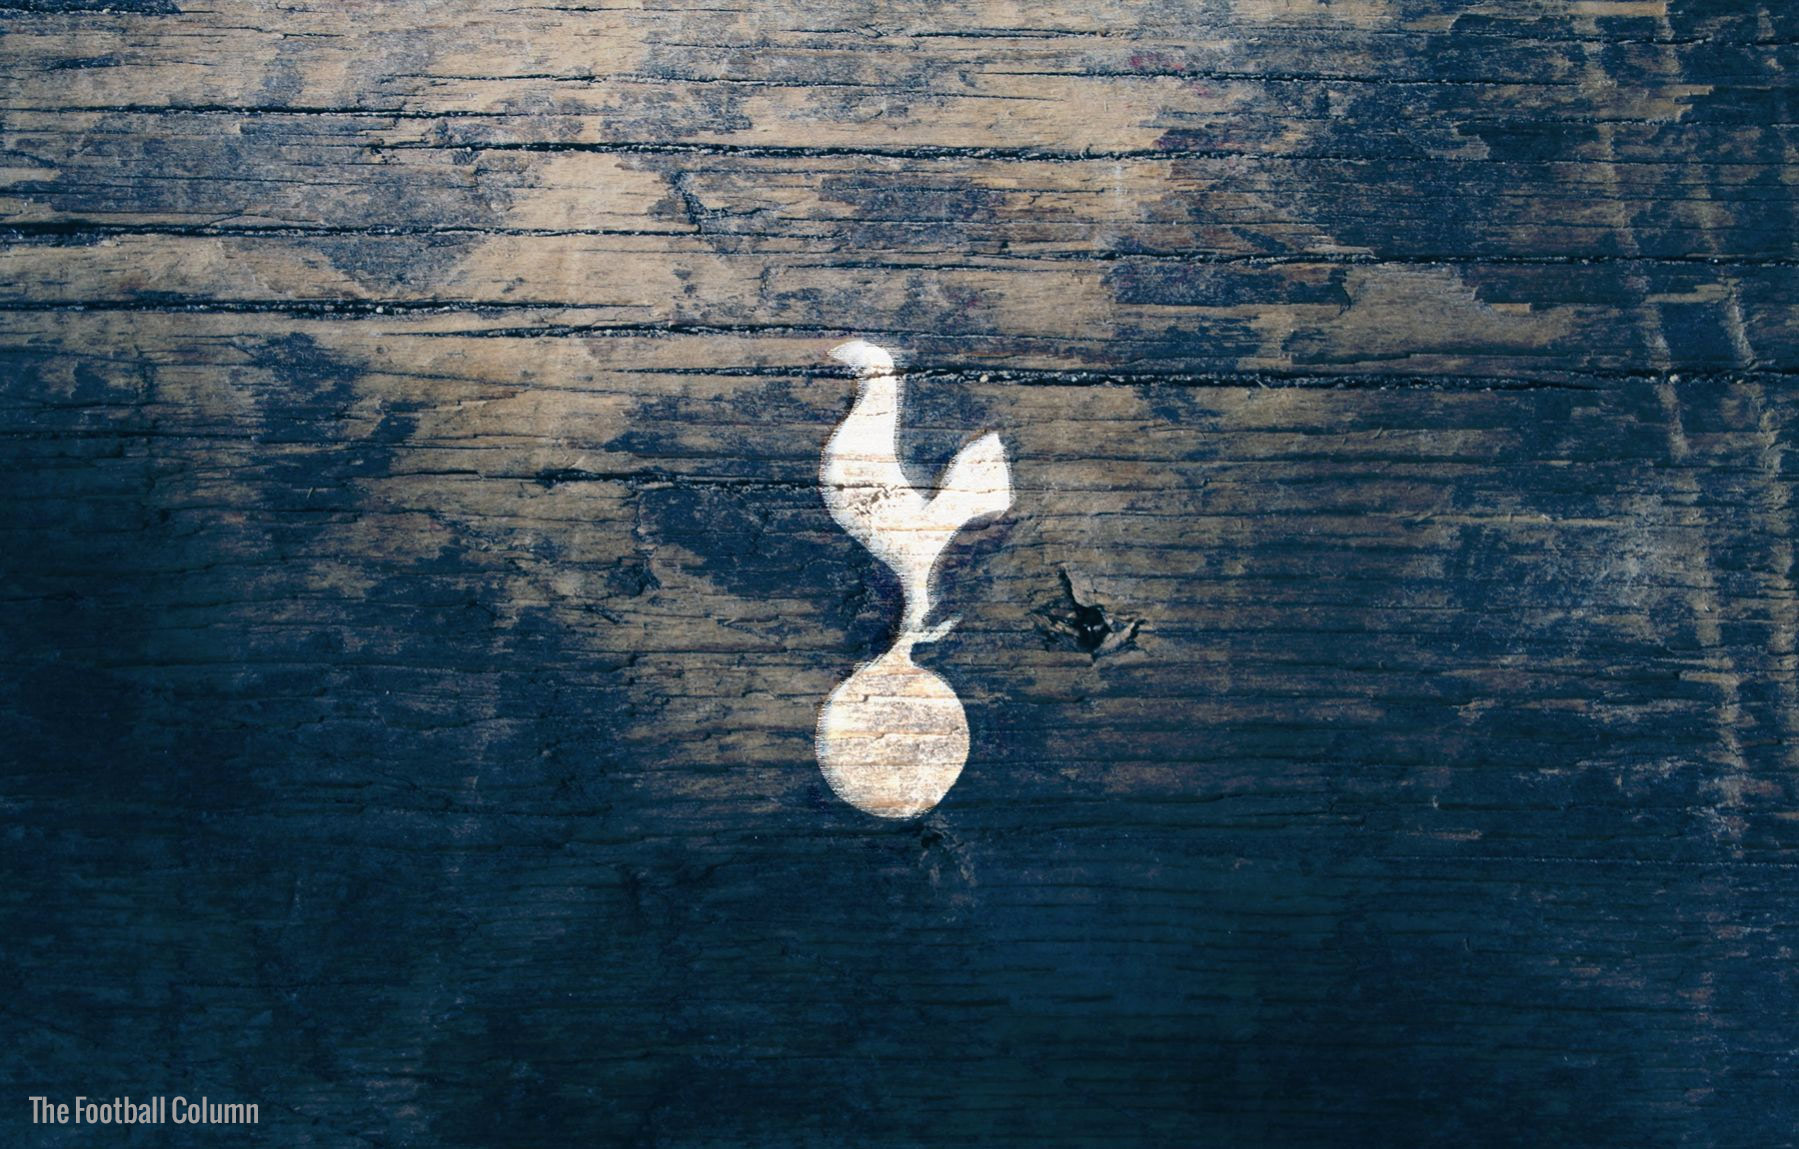 Highest Quality Tottenham Hotspur Fc Wallpaper For All To Use Enjoy